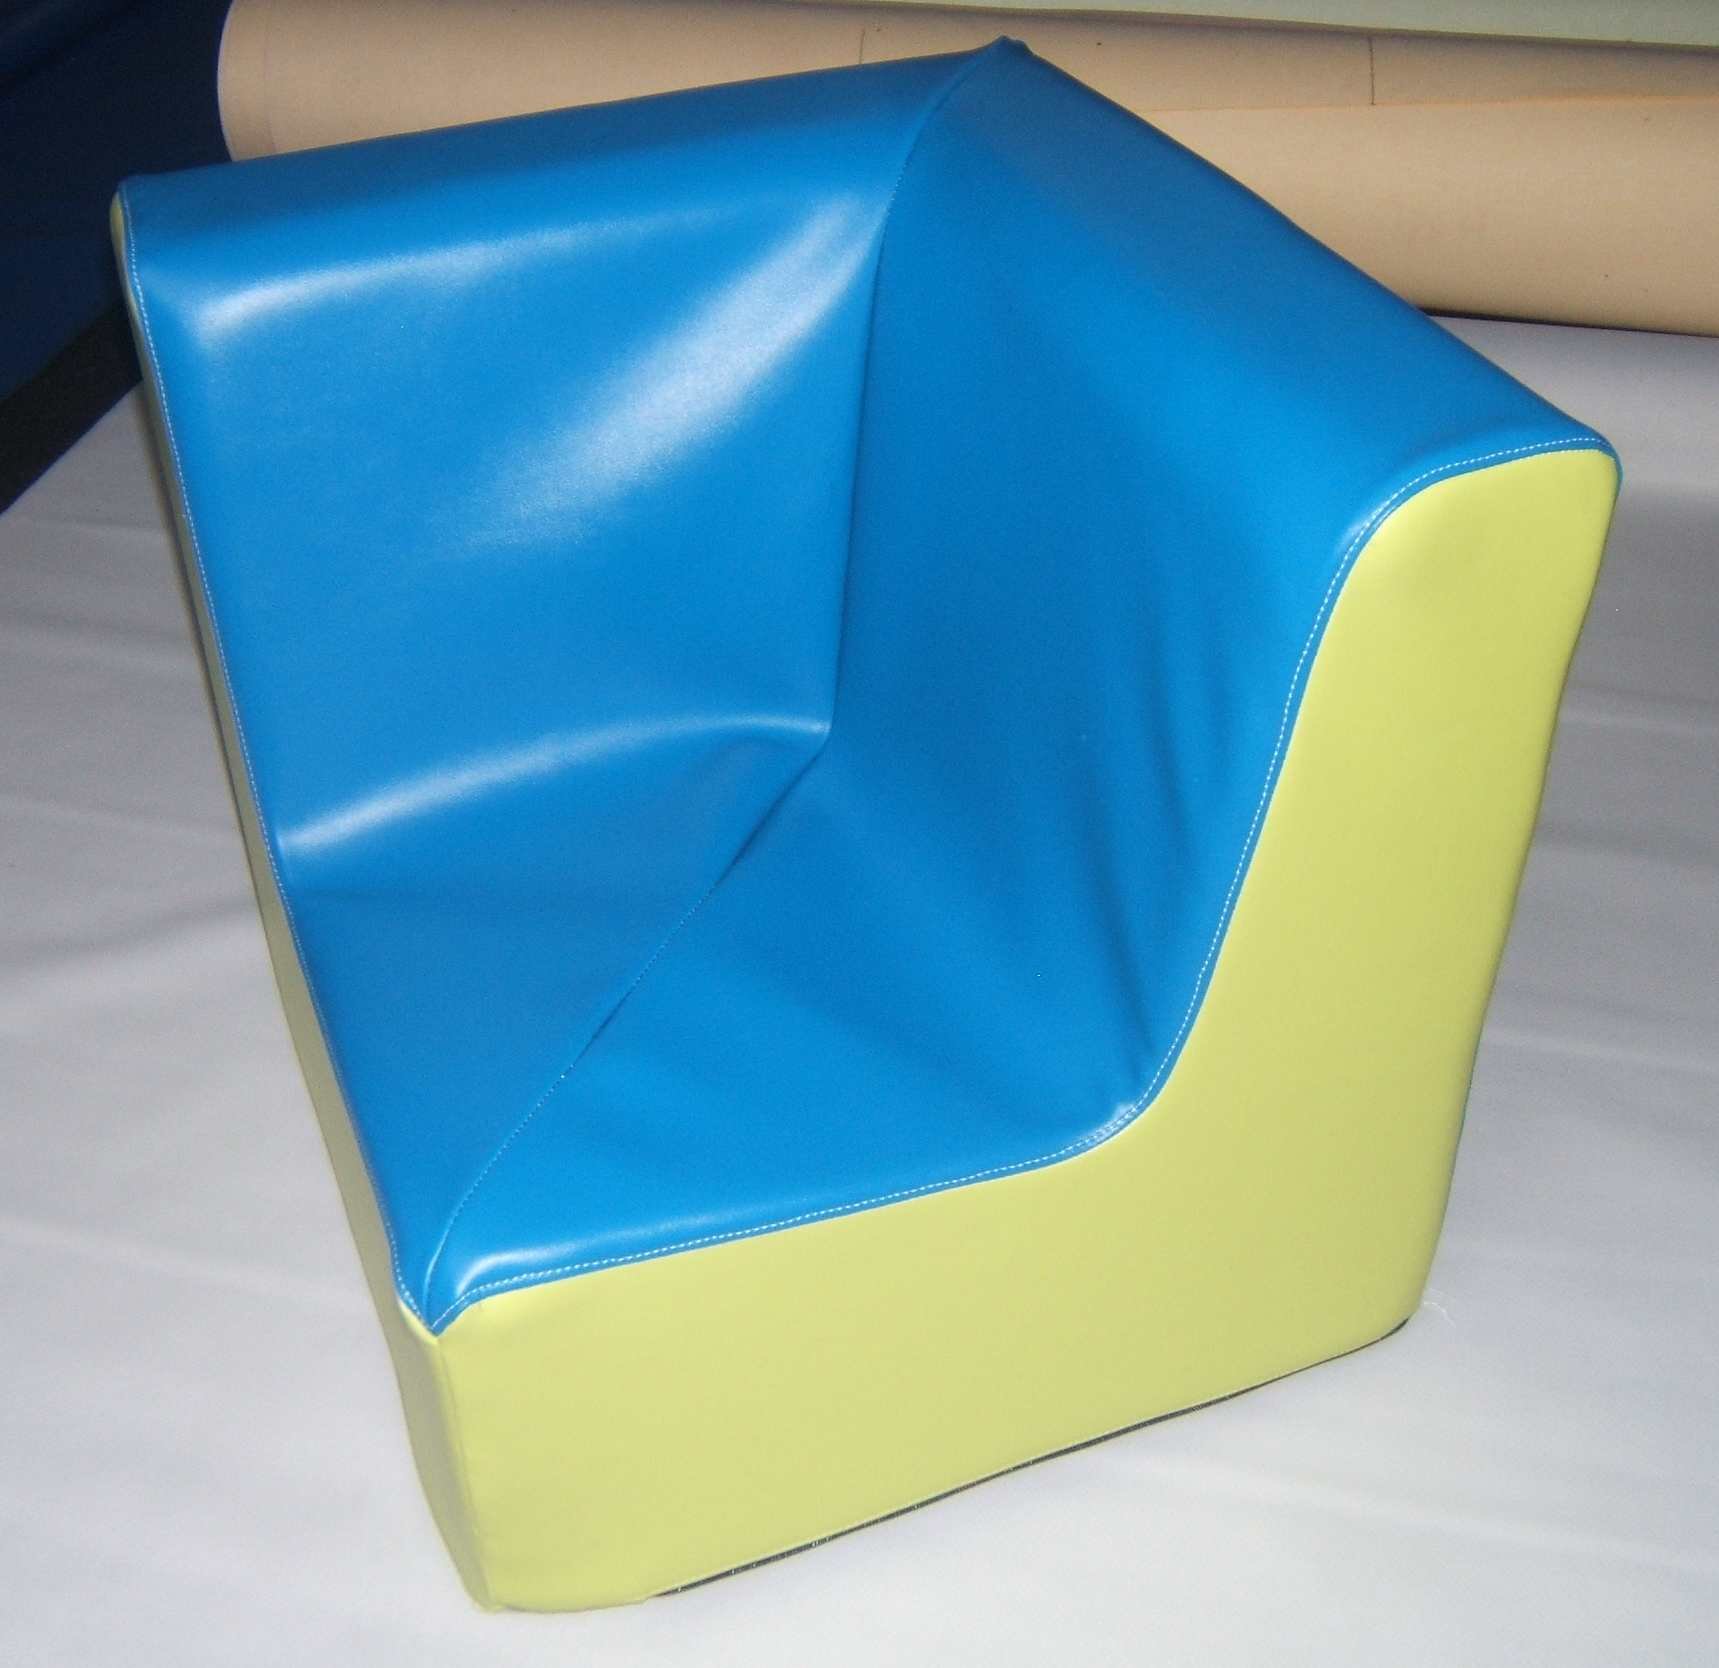 Chauffeuse Angle 90 ° - 40 x 40 x 36 cm - Assise 17 (REF A17-3)